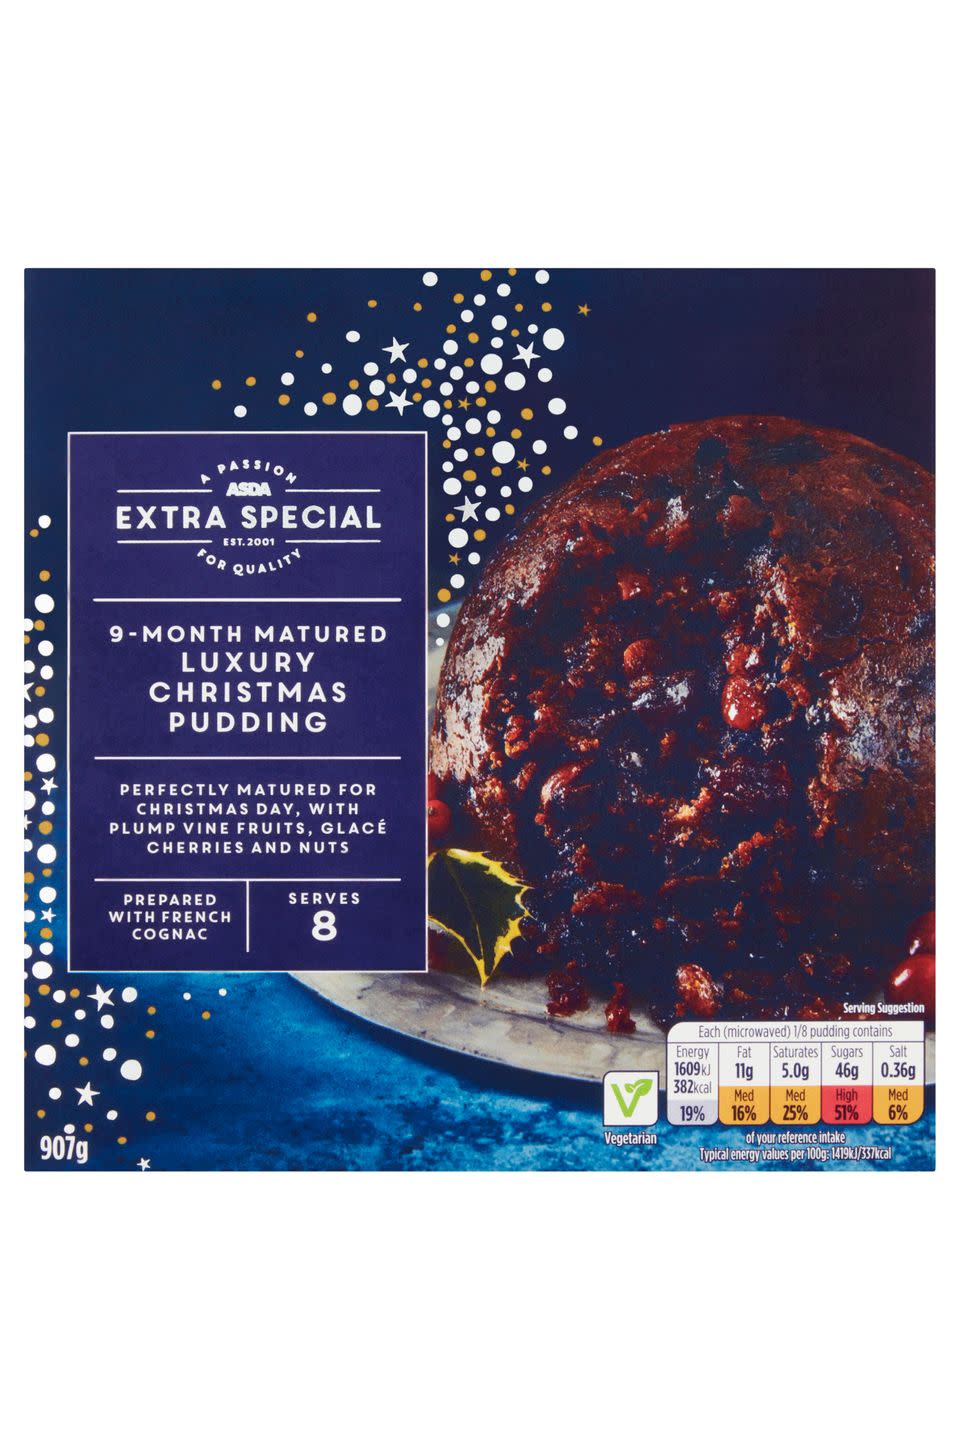 Asda Extra Special 9-Month Matured Luxury Christmas Pudding